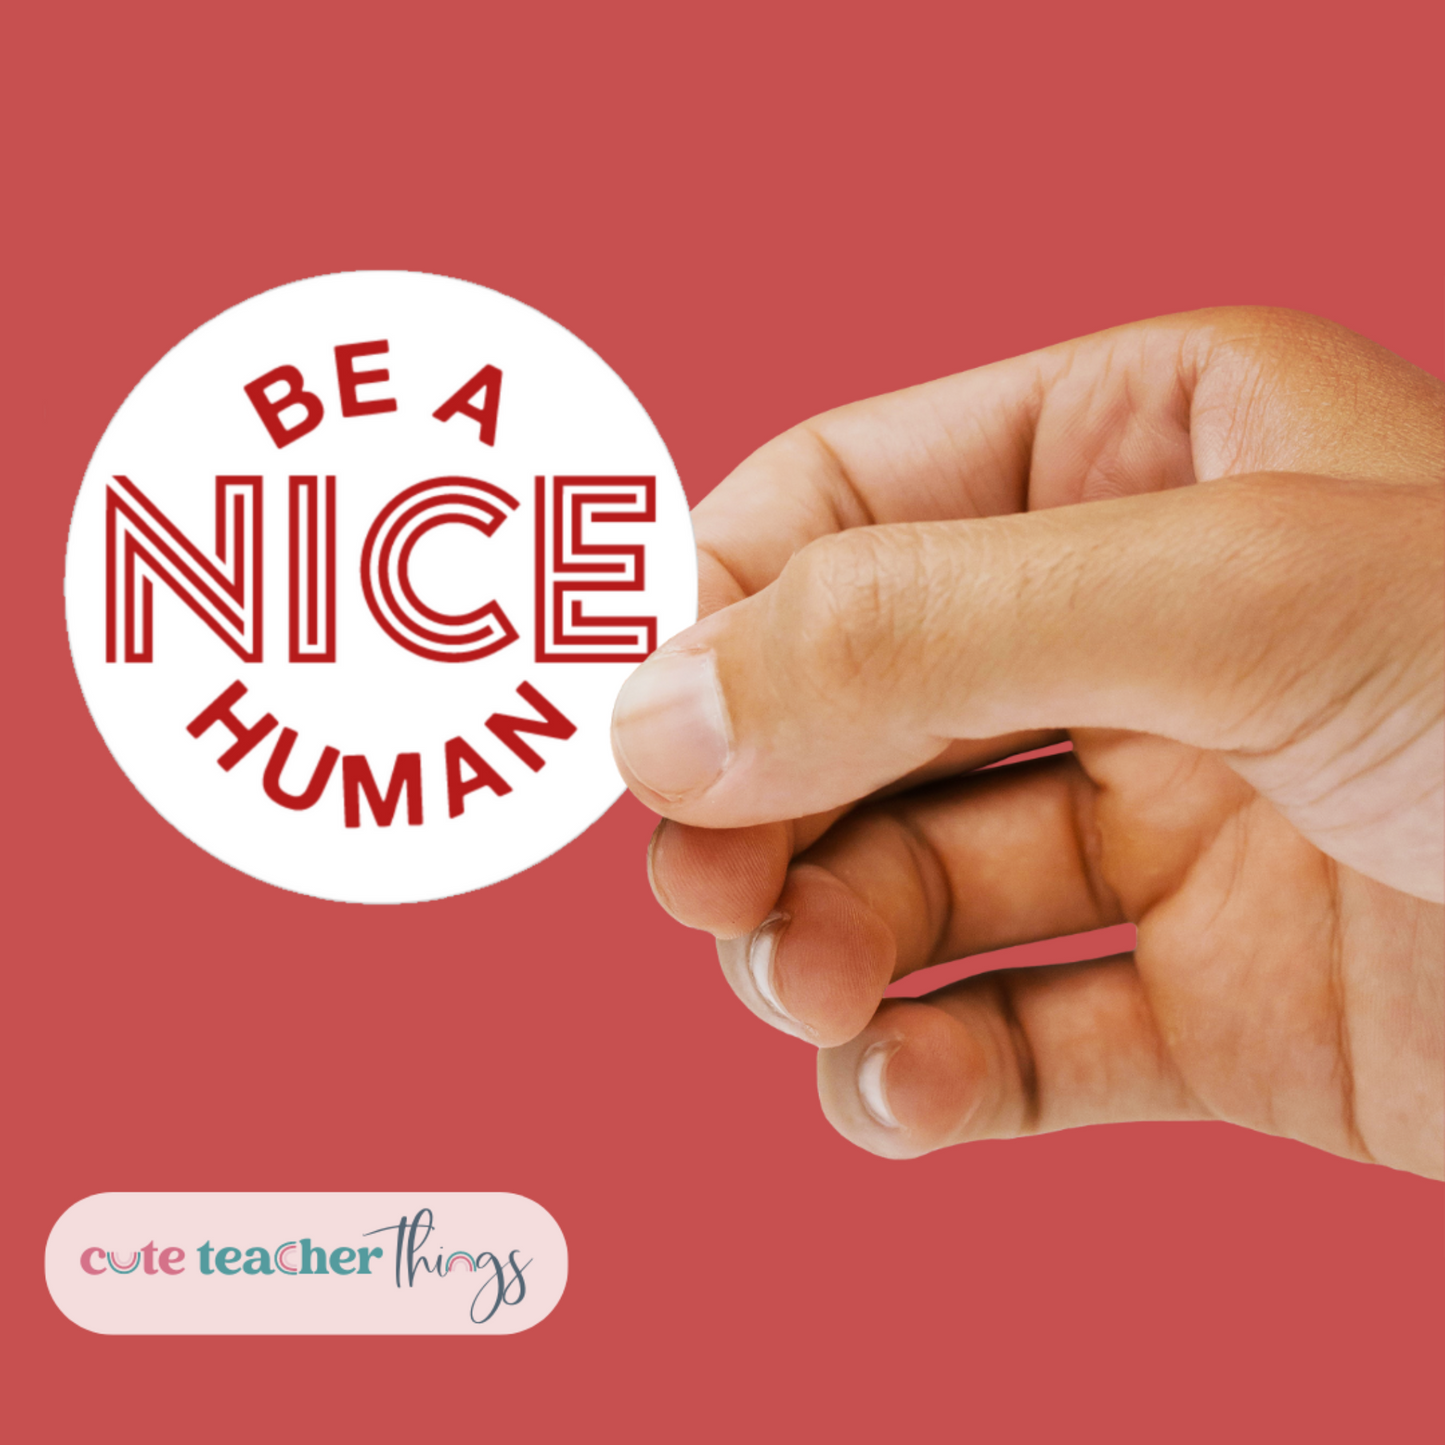 be a nice human motivational quotes sticker